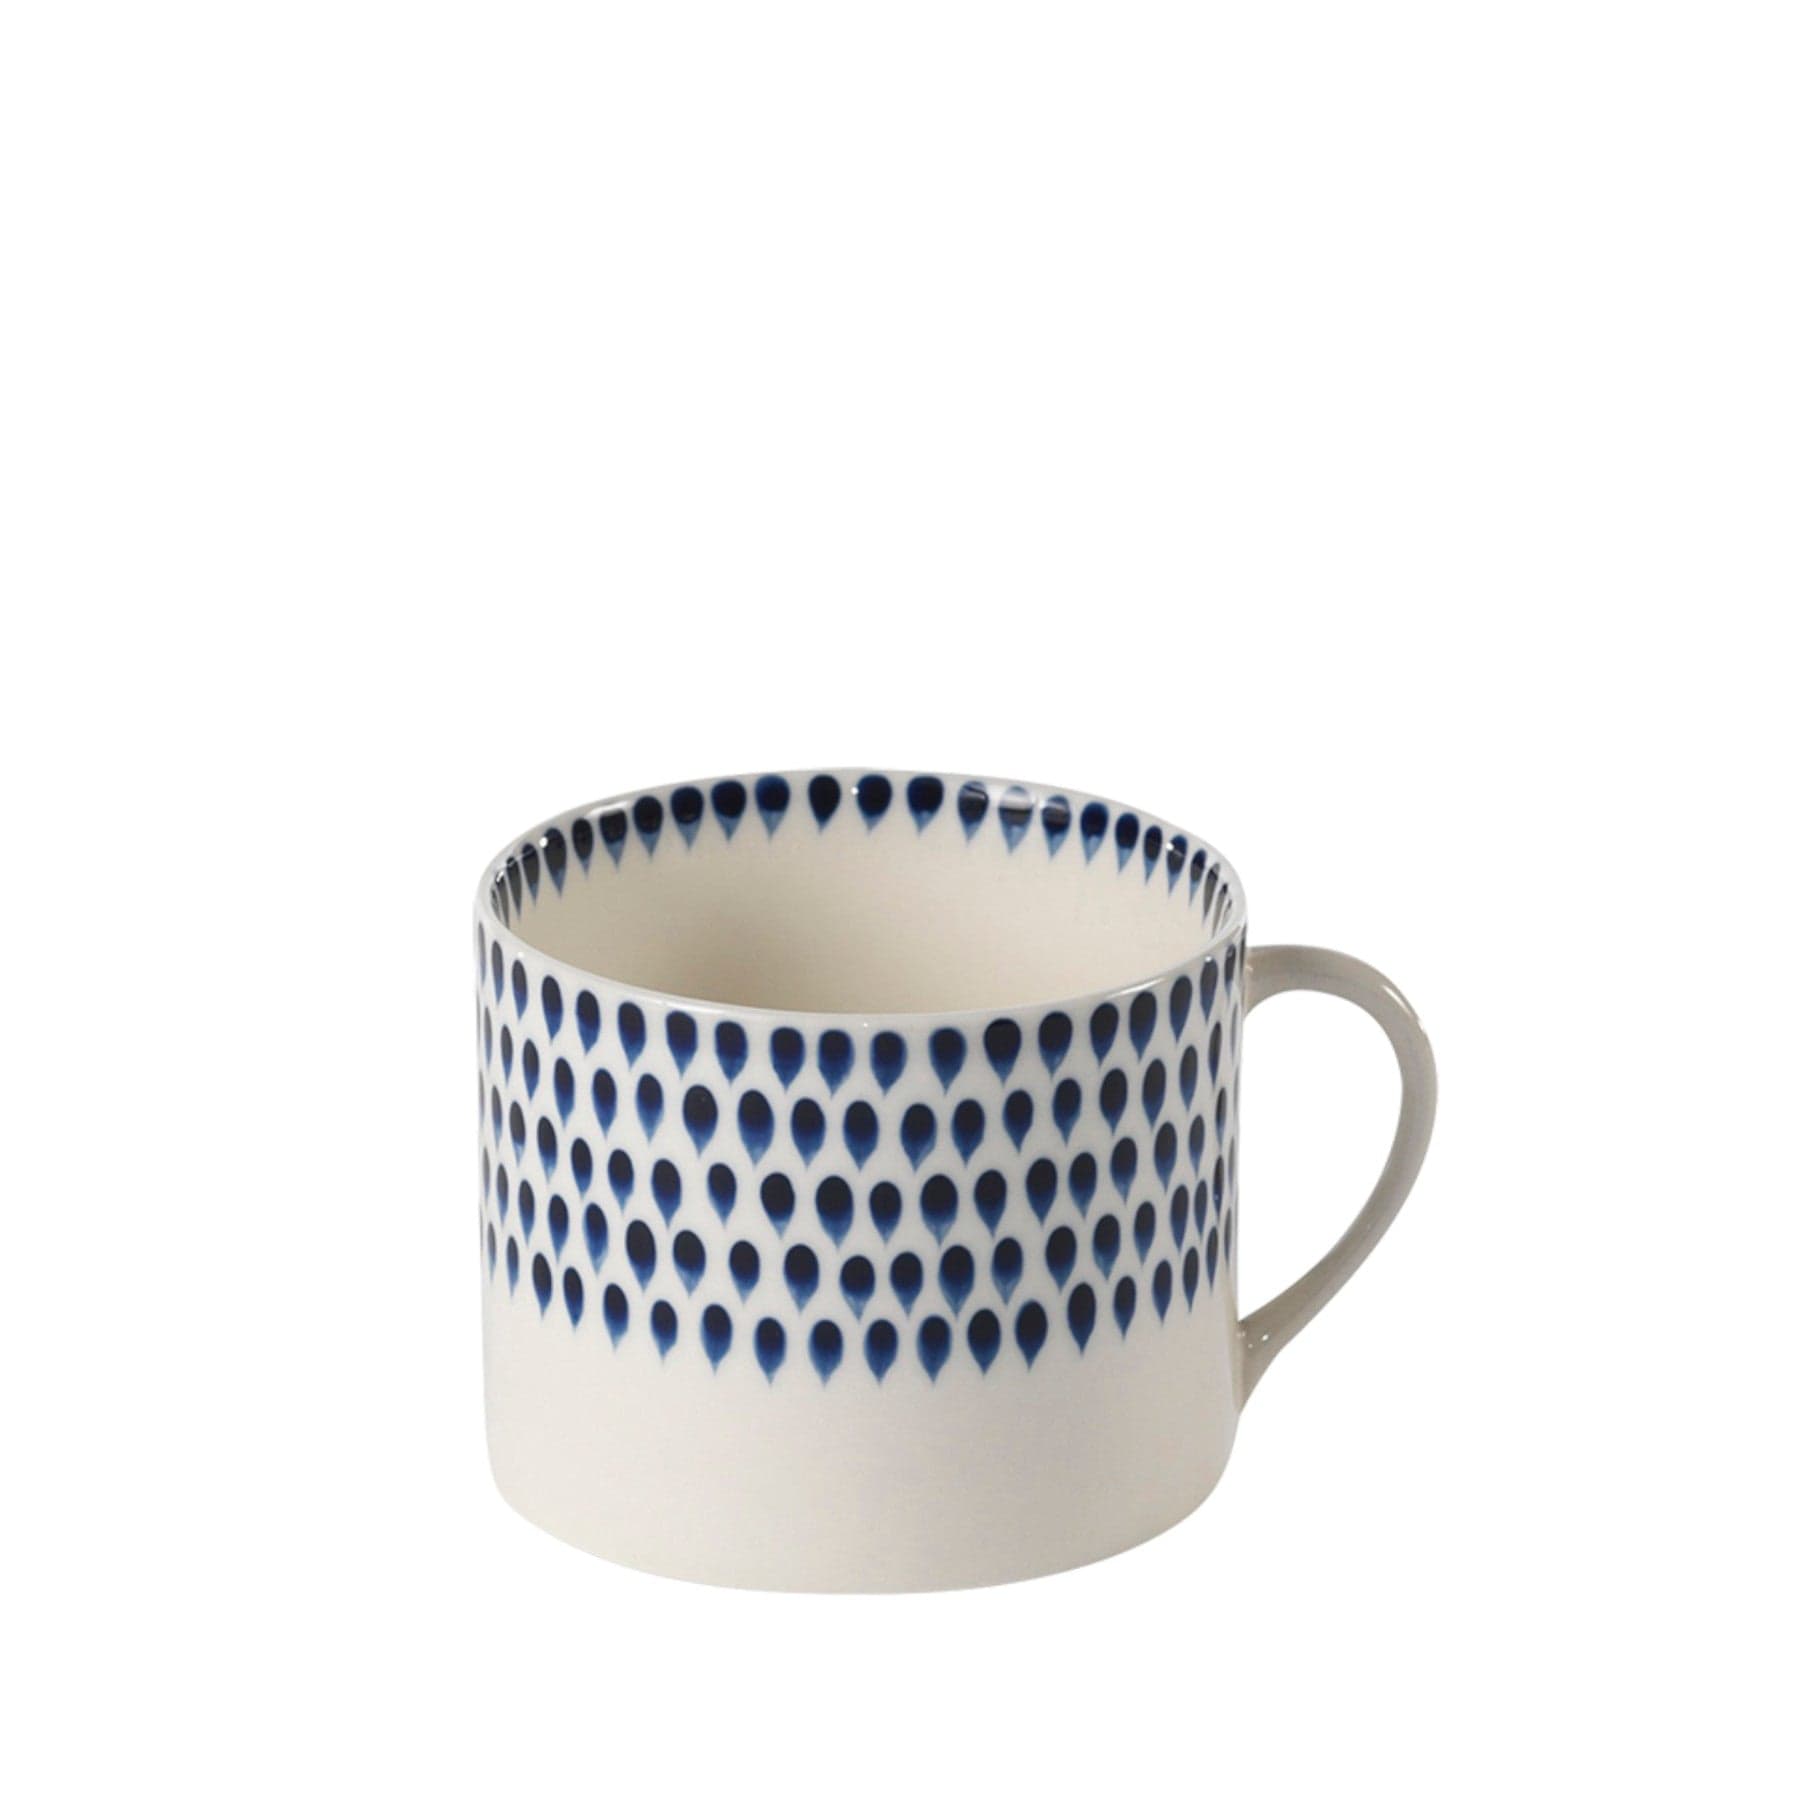 Blue and white ceramic mug with teardrop pattern isolated on a white background